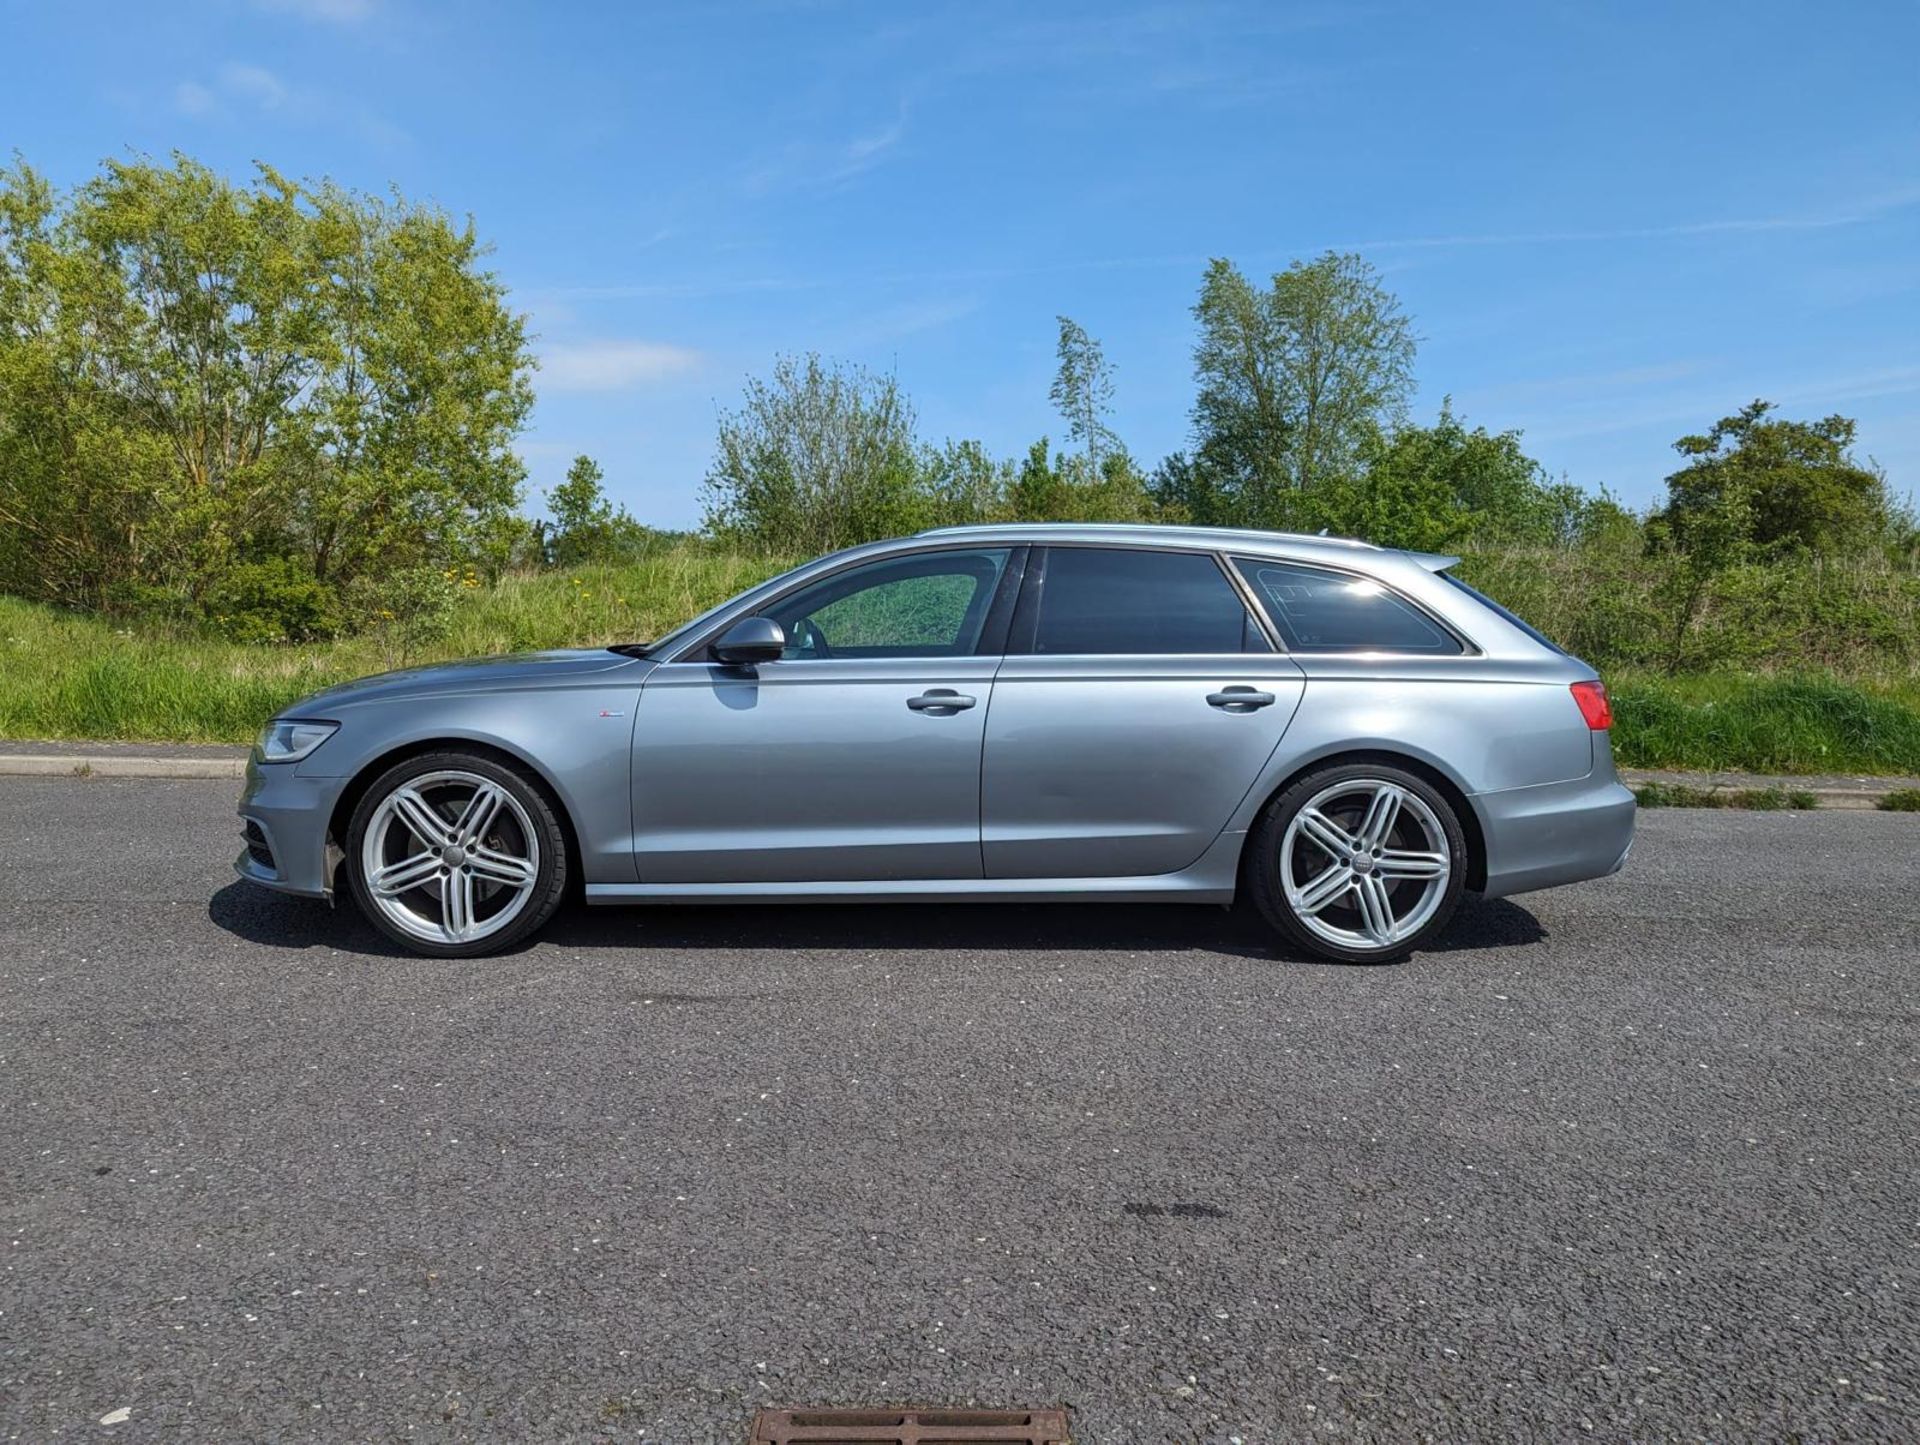 2012/61 REG AUDI A6 S LINE TDI 3.0 DIESEL QUATTRO AUTOMATIC GREY ESTATE, SHOWING 3 FORMER KEEPERS - Image 4 of 52